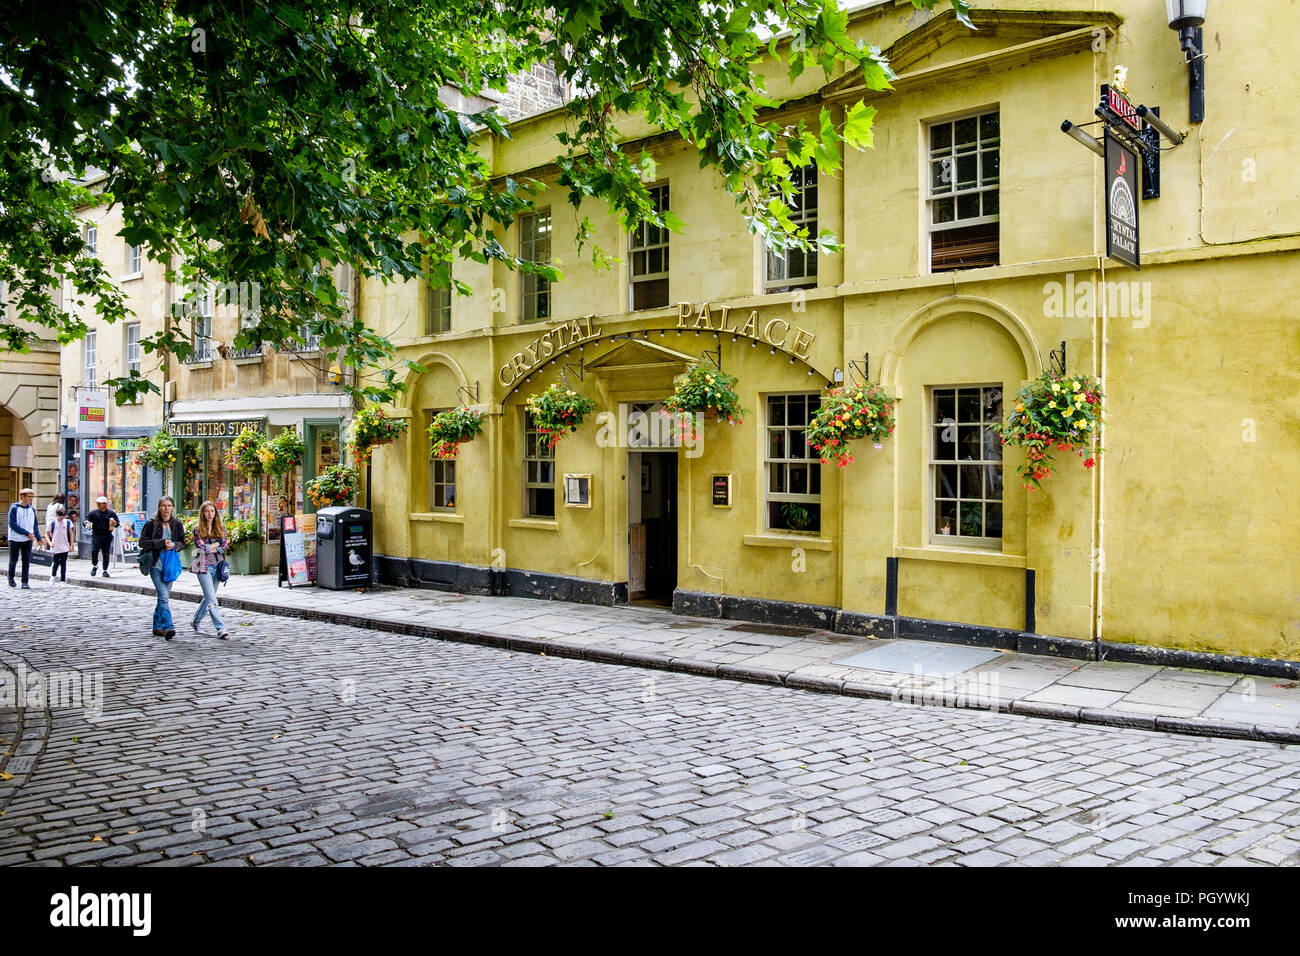 The exterior of The Crystal Palace pub, a traditional english pub / public house is pictured in Bath Somerset England UK Stock Photo